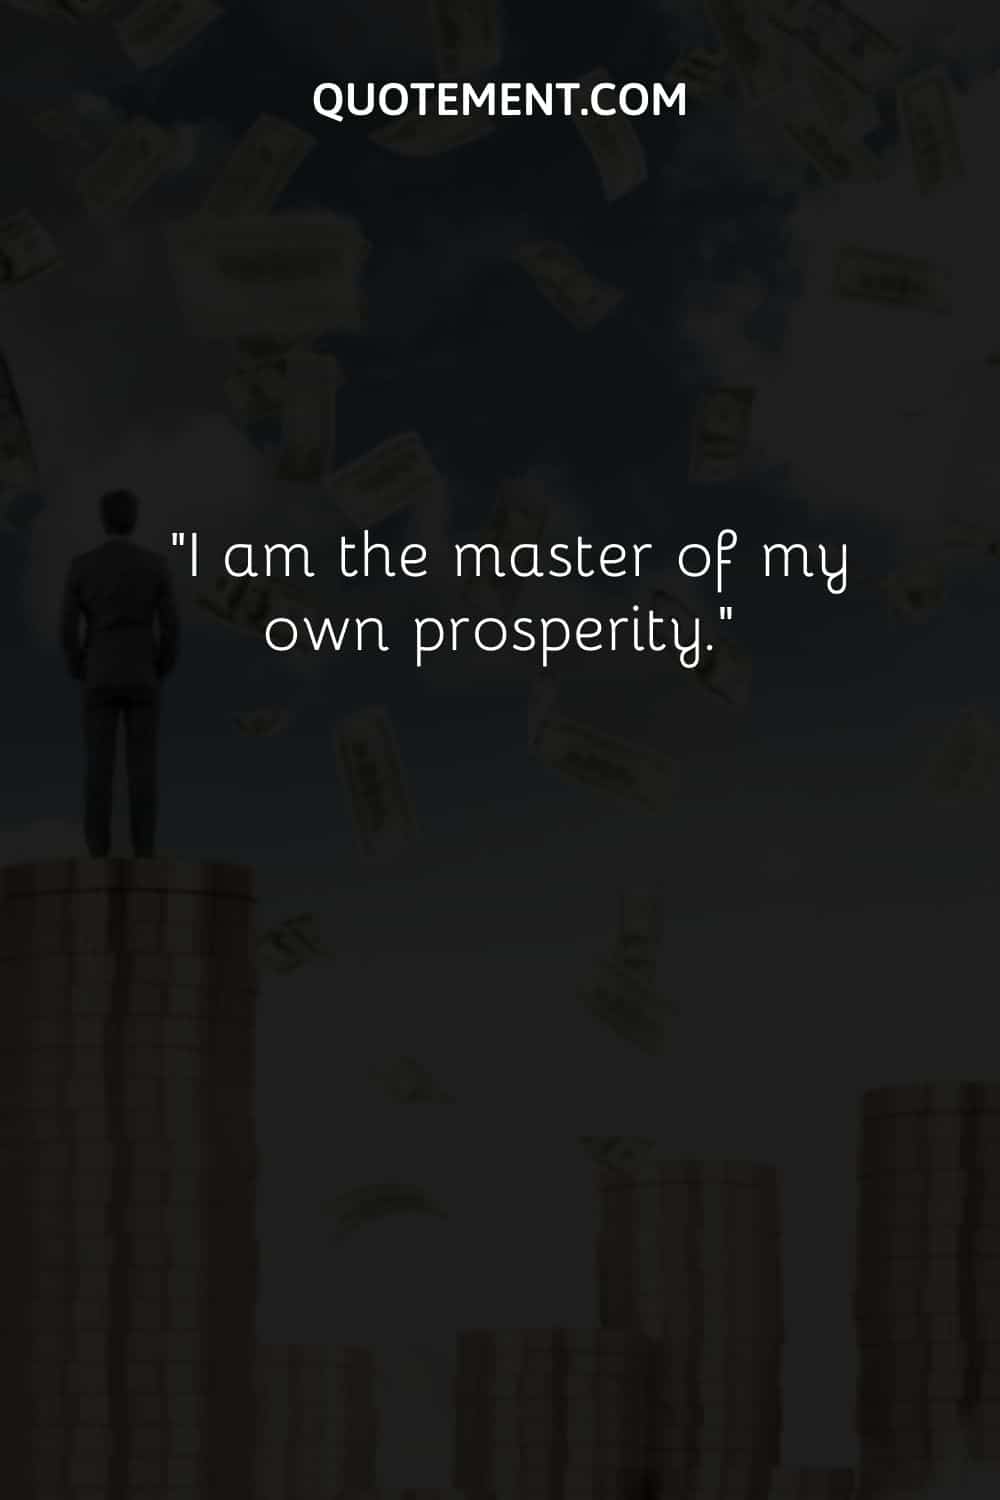 a man standing on a pile of coins image representing affirmation for prosperity